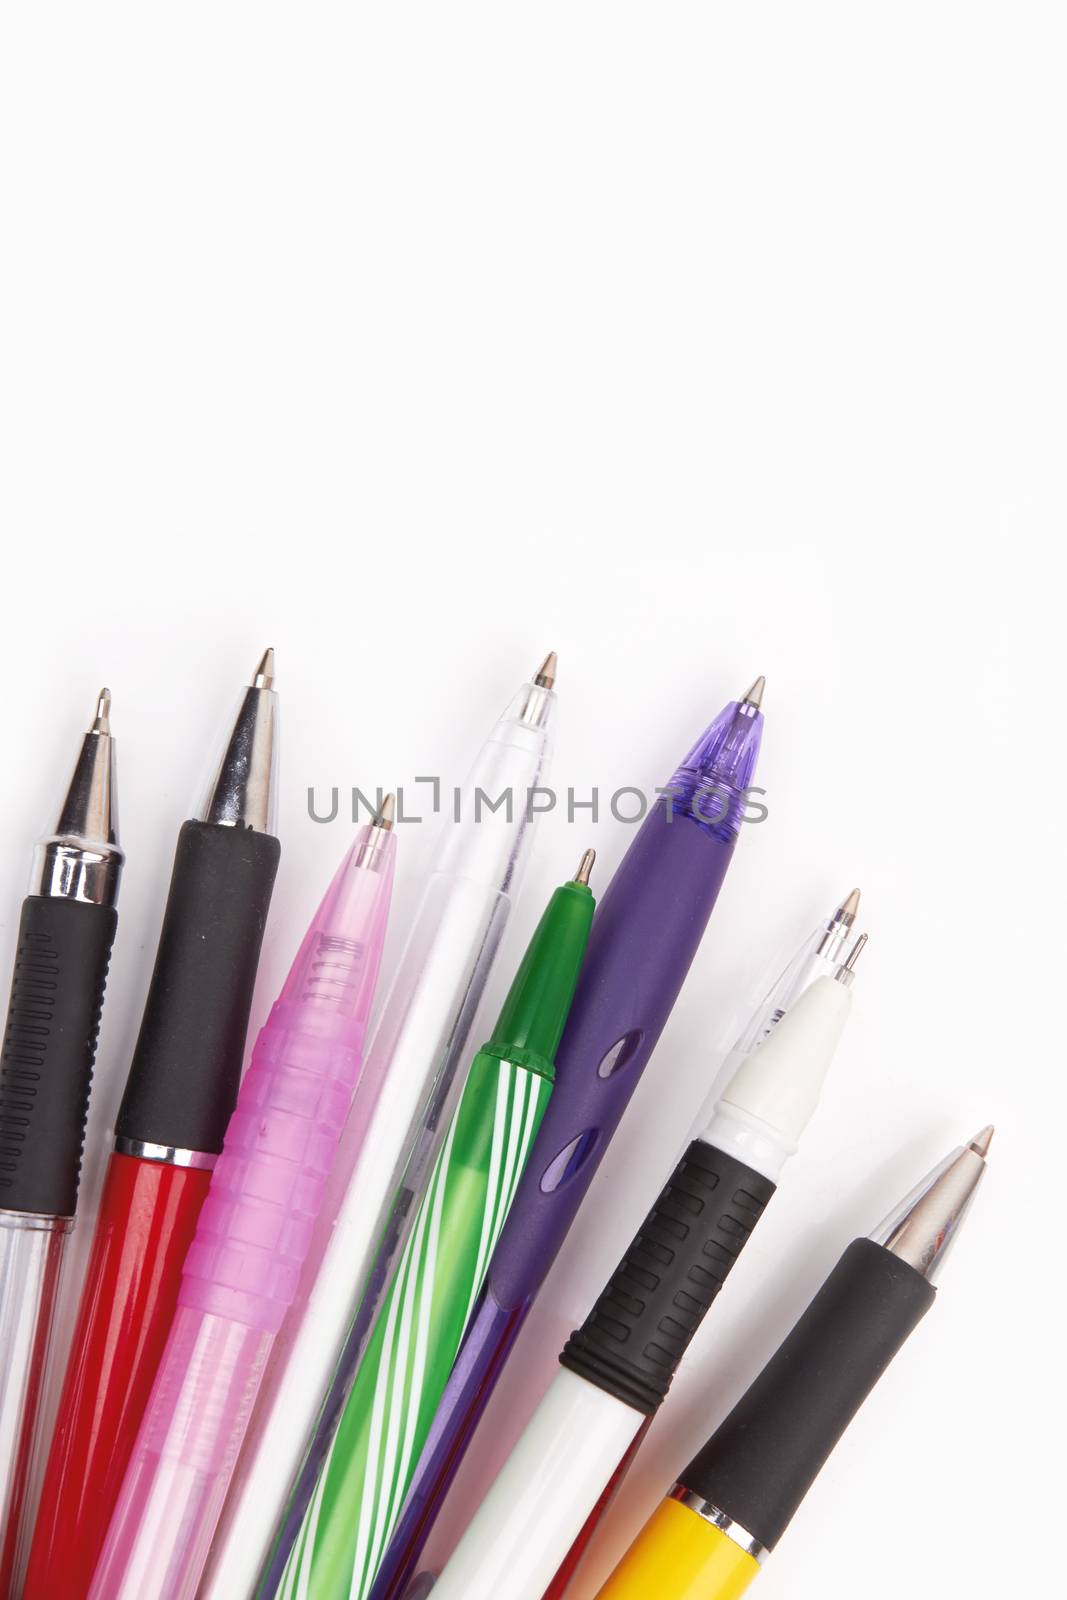 Different kinds of pens isolated on white background 